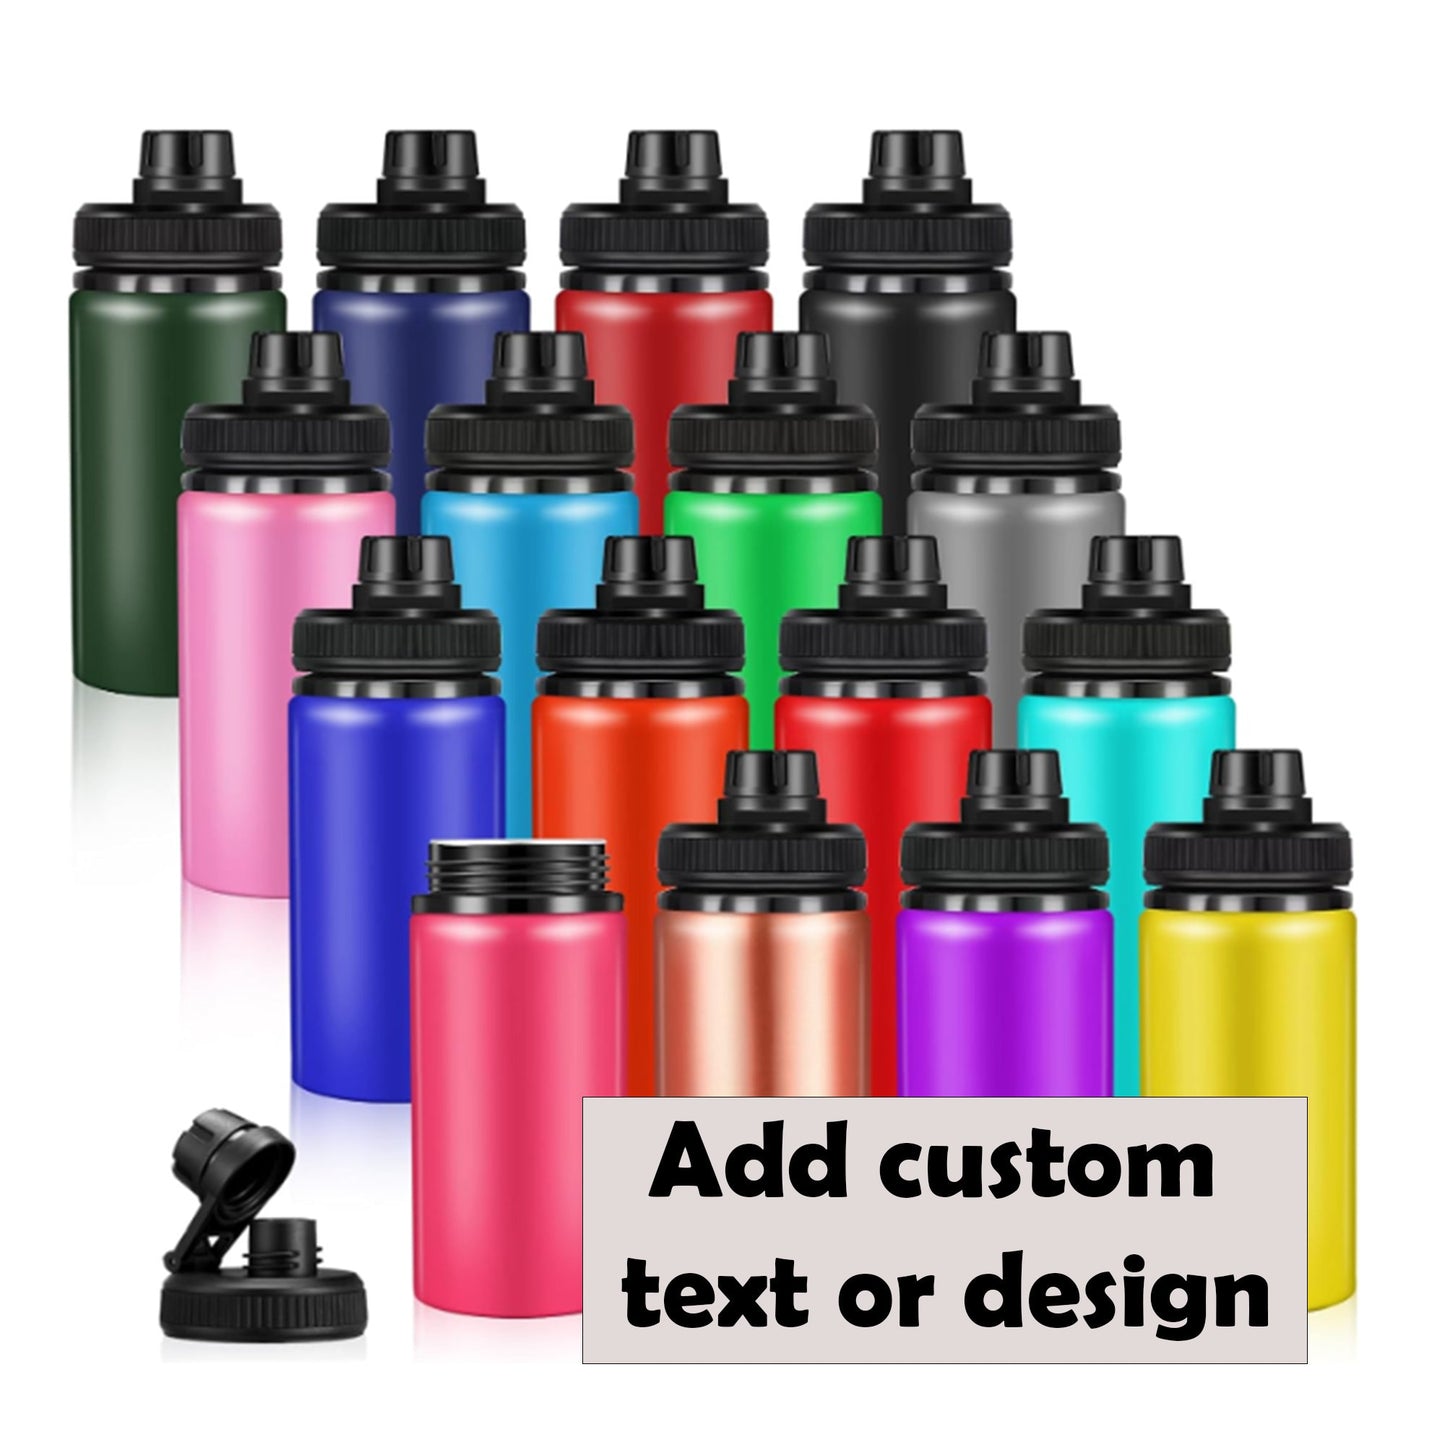 Vibrant 17oz Aluminum Bottle - Customizable for Vacations, Teams, & More